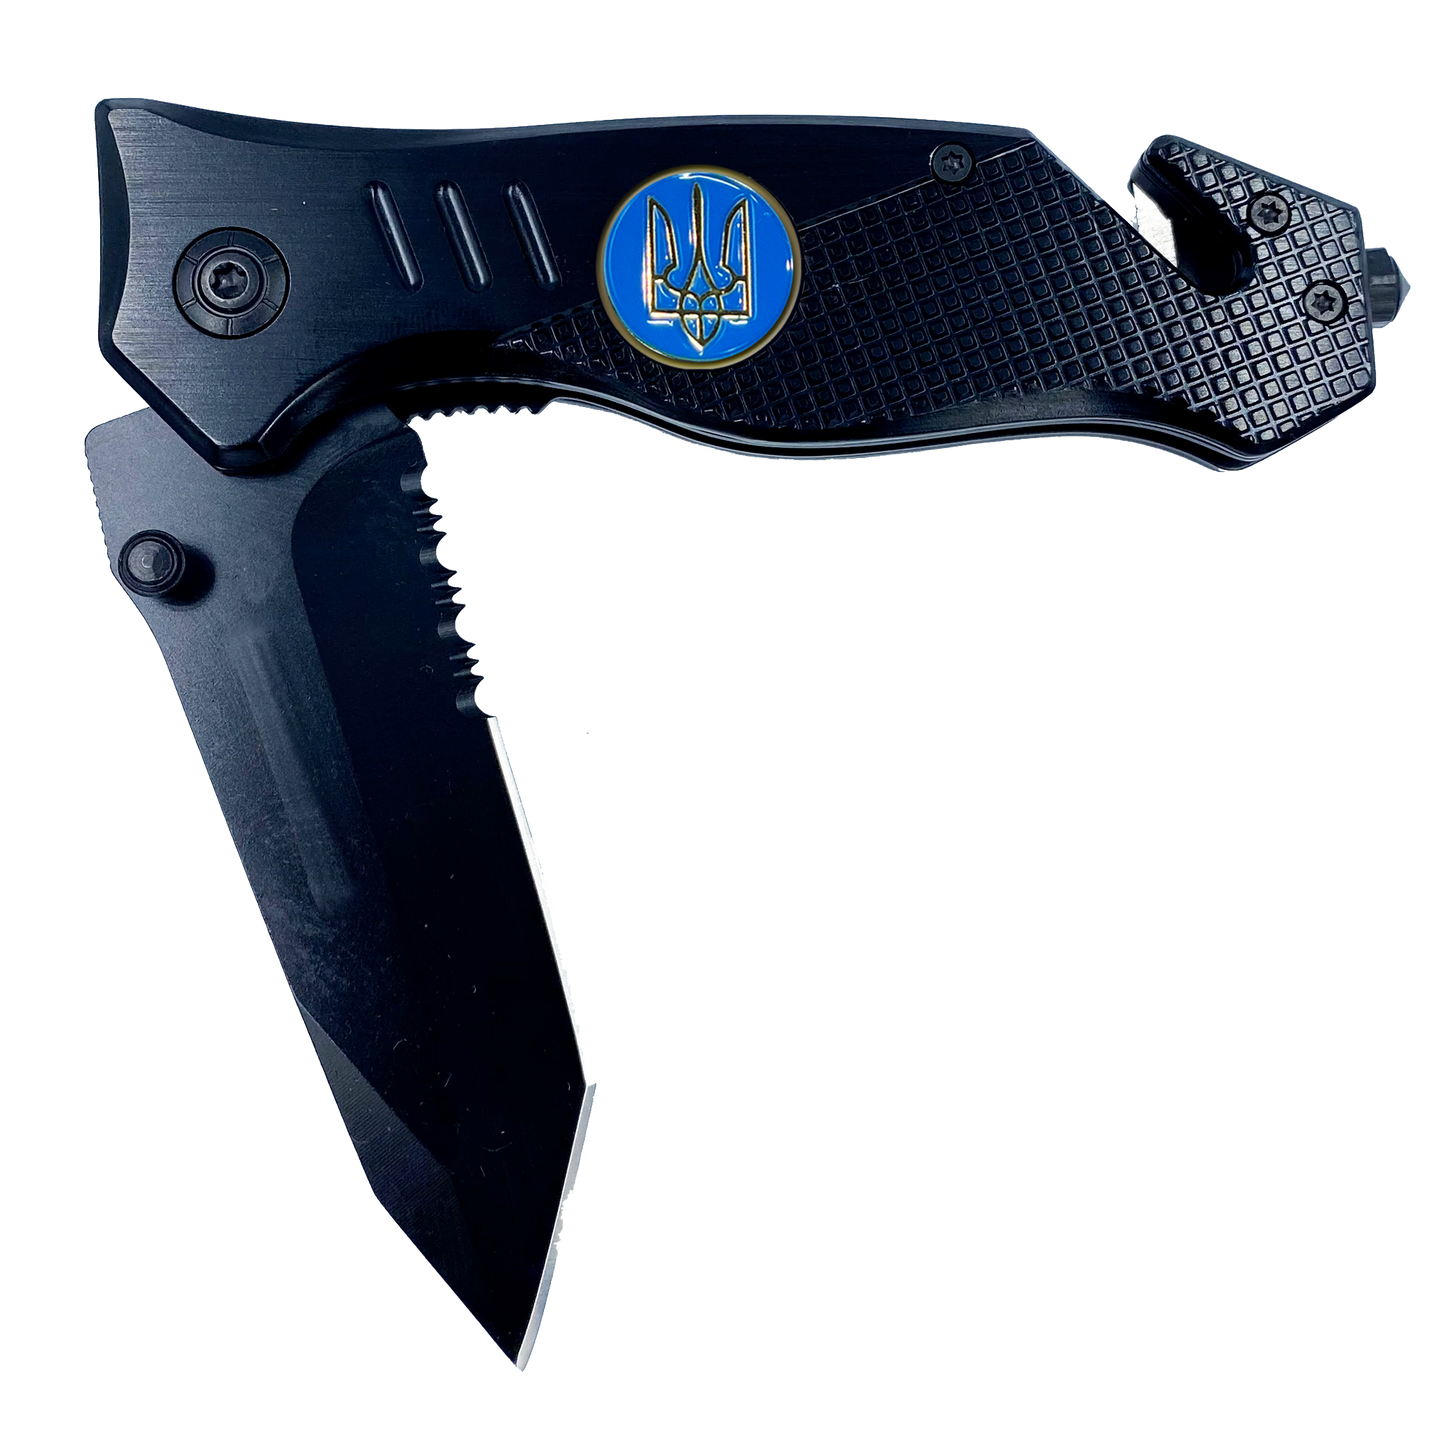 Ukraine Armed Forces Ukrainian Army Navy Air Force Military collectible 3-in-1 Police Tactical Rescue knife tool with Seatbelt Cutter, Steel Serrated Blade, Glass Breaker